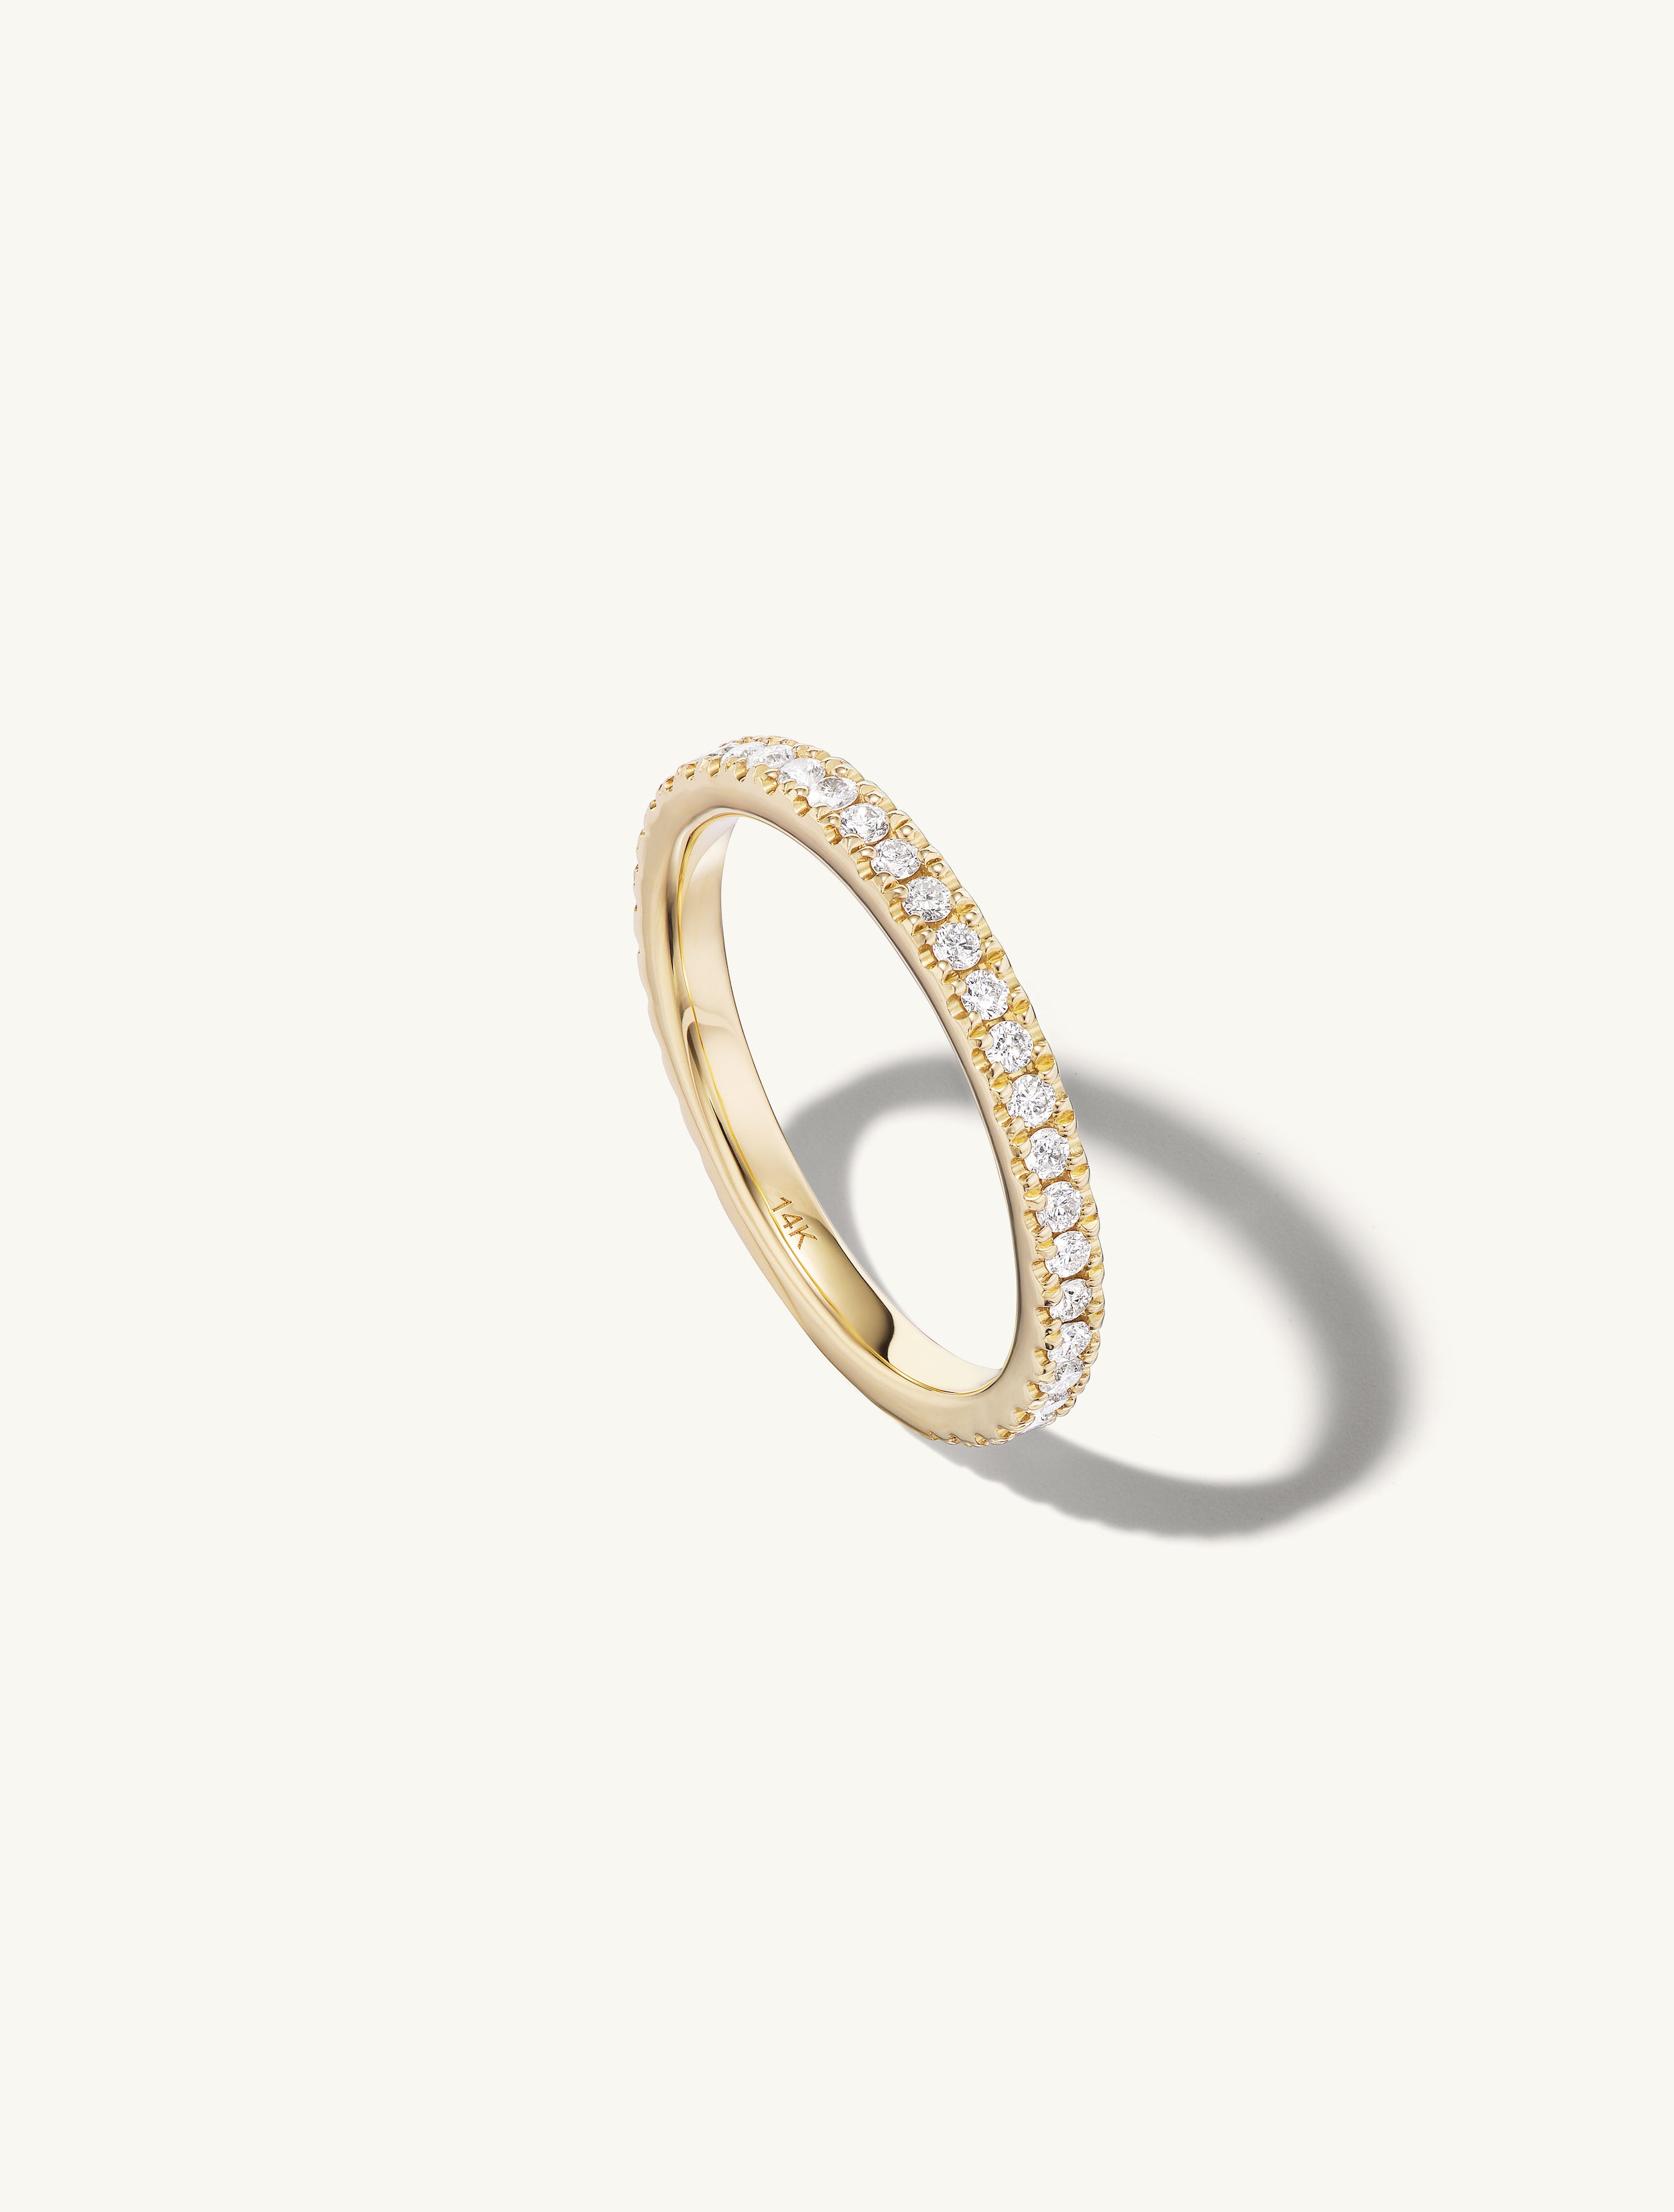 French Pave Diamond Try-On Band